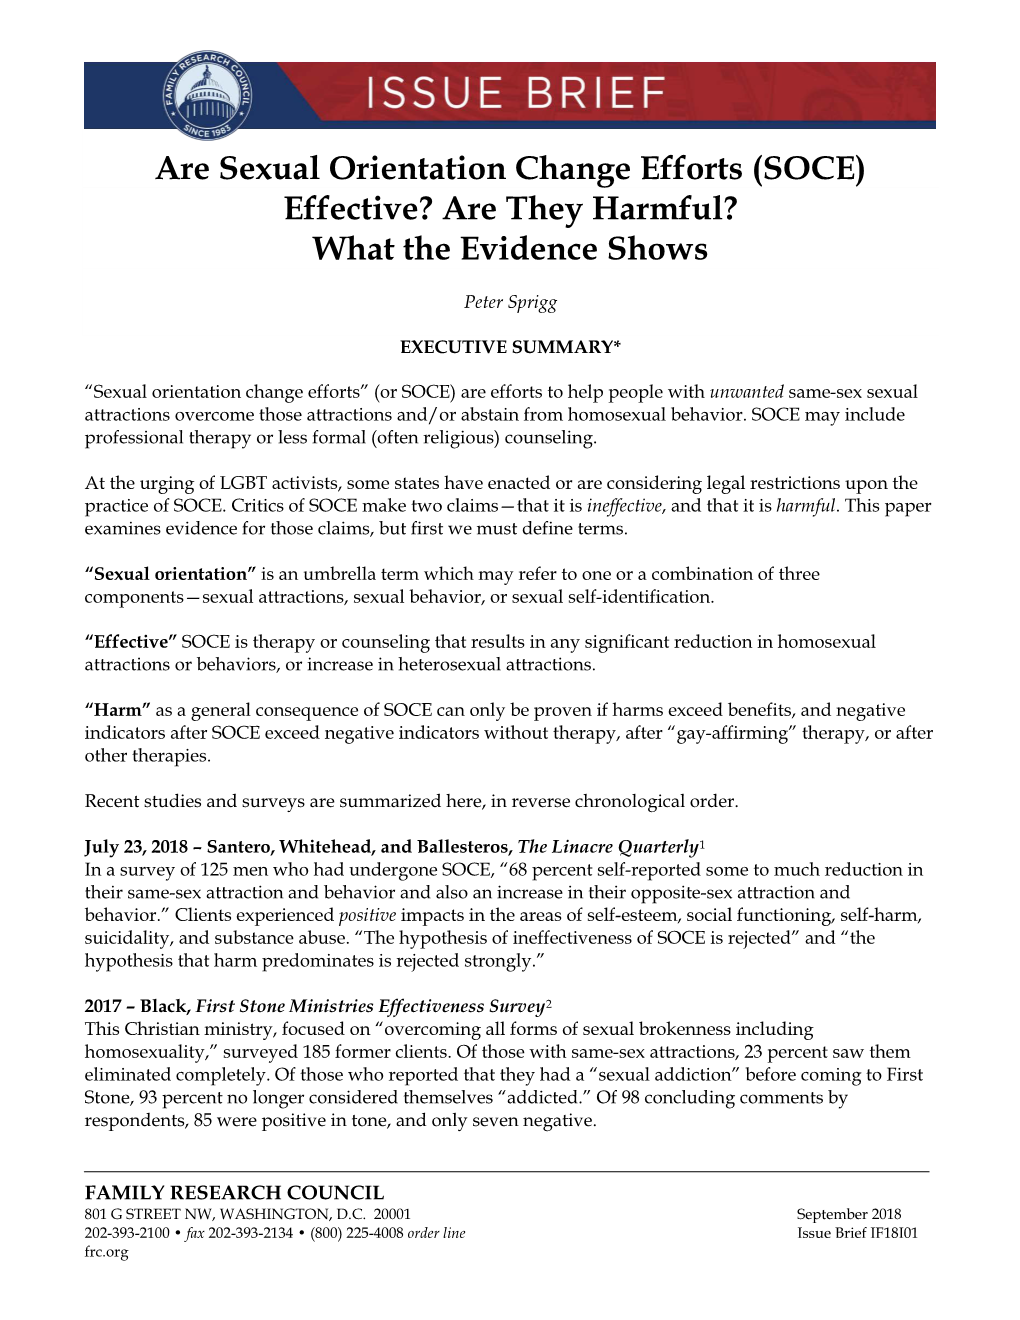 Are Sexual Orientation Change Efforts (SOCE) Effective? Are They Harmful? What the Evidence Shows